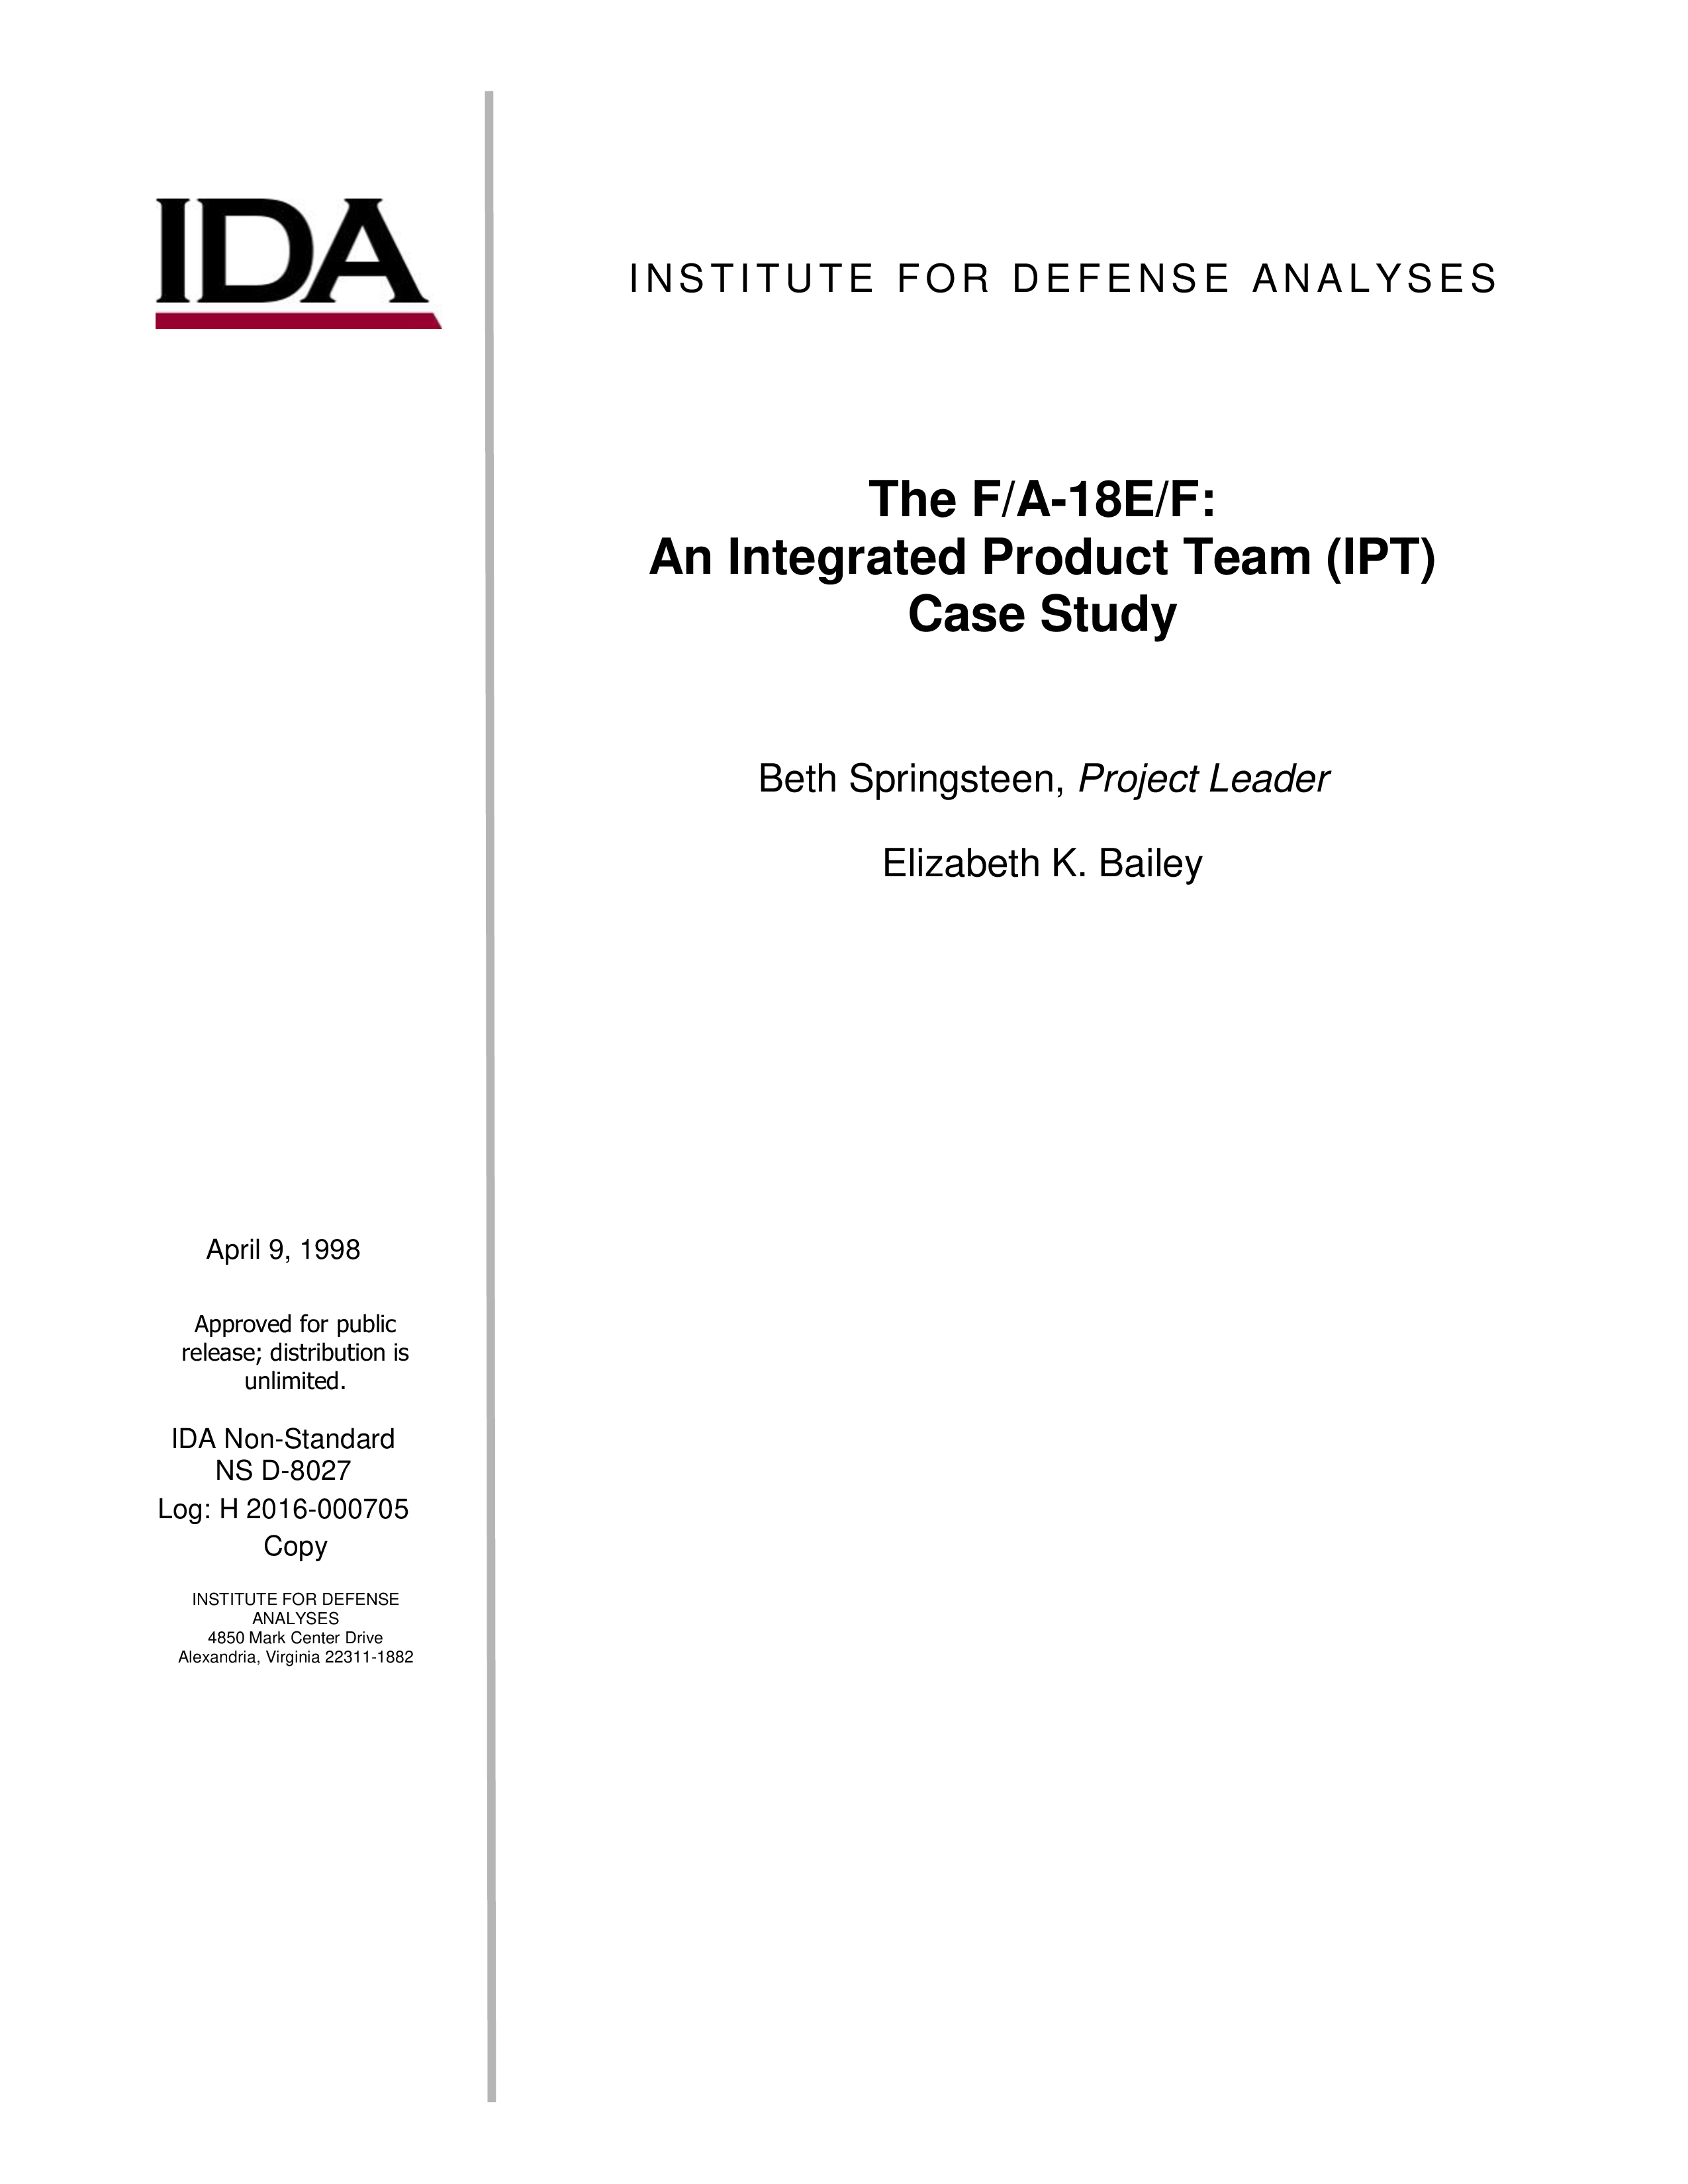 The F/A-18E/F: An Integrated Product Team (IPT) Case Study